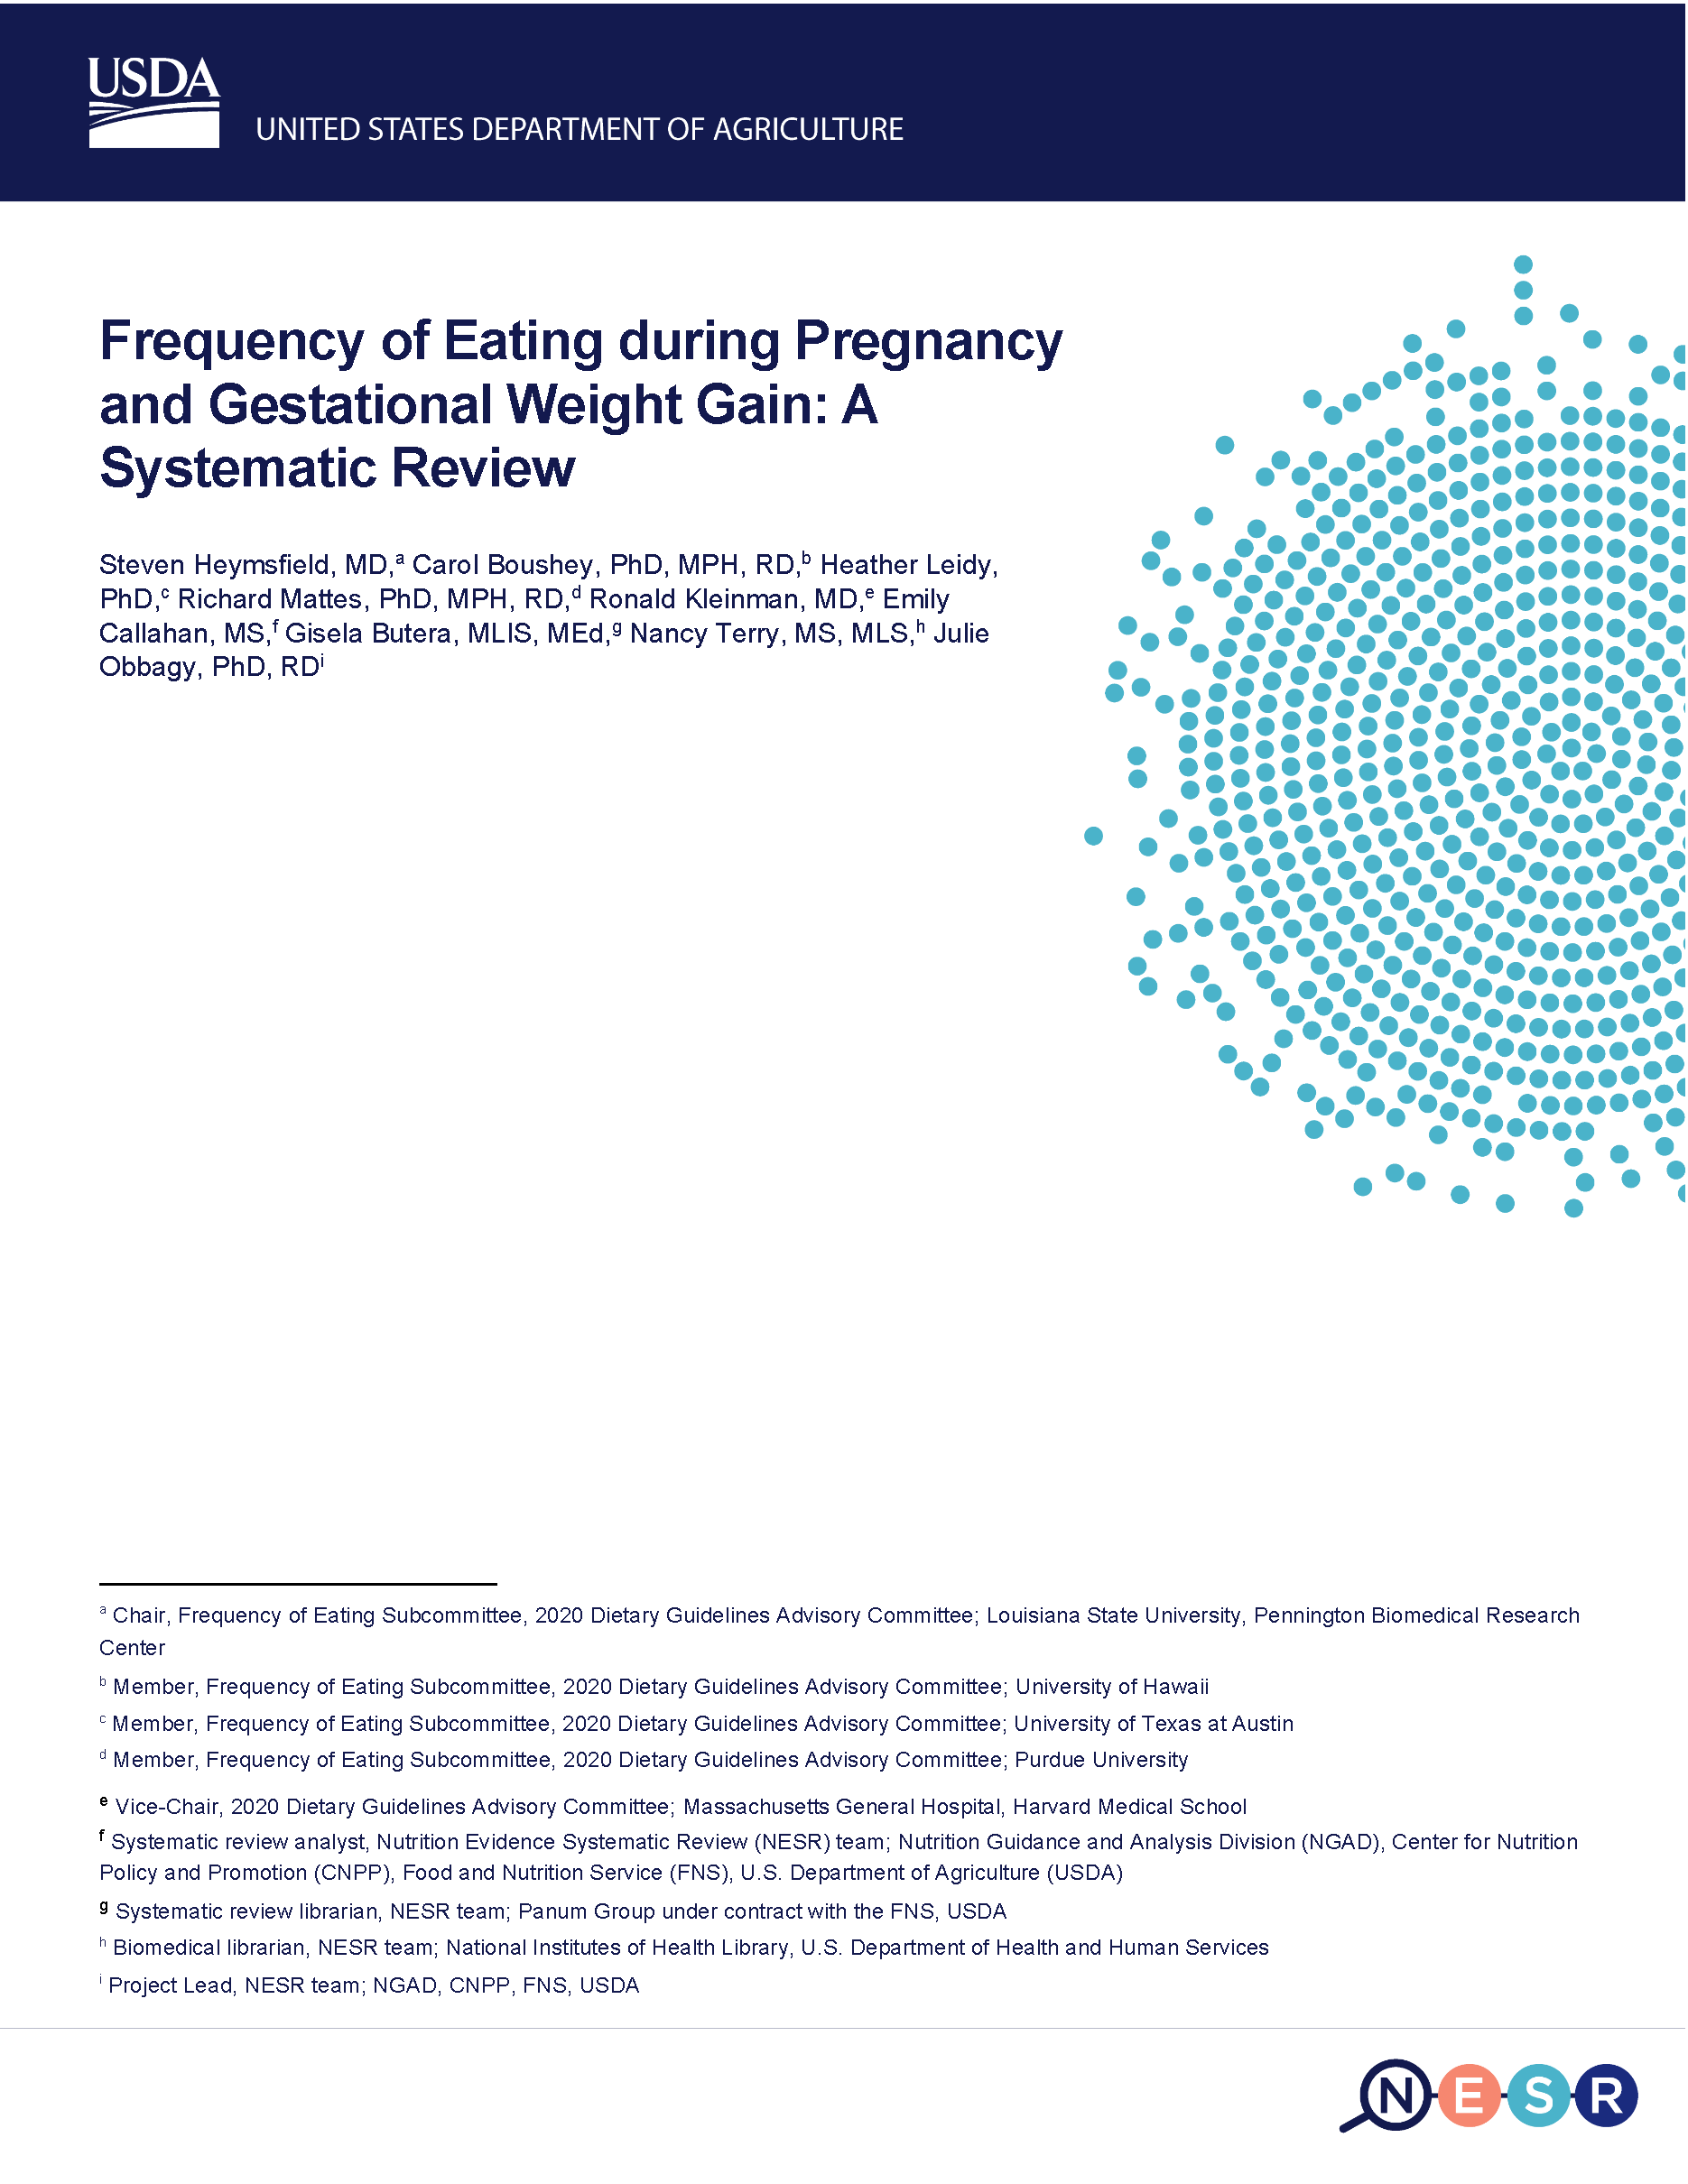 Cover of frequency of eating and gestational weight gain report